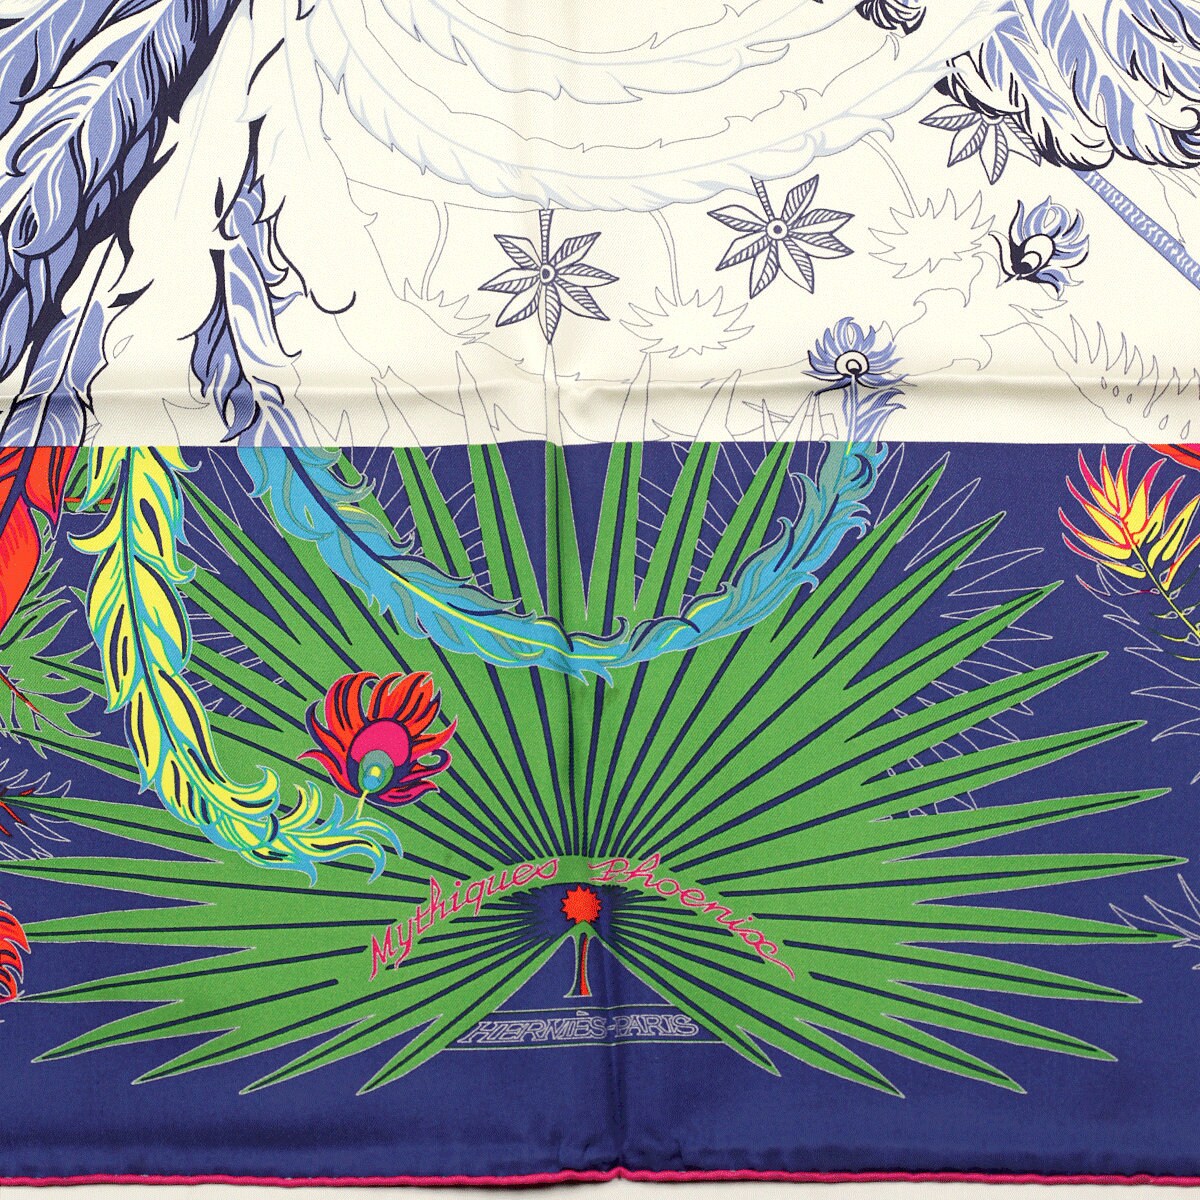 Hermes Scarf "Mythiques Phoenix" by Laurence Bourthoumieux 90cm Silk | Carre Foulard